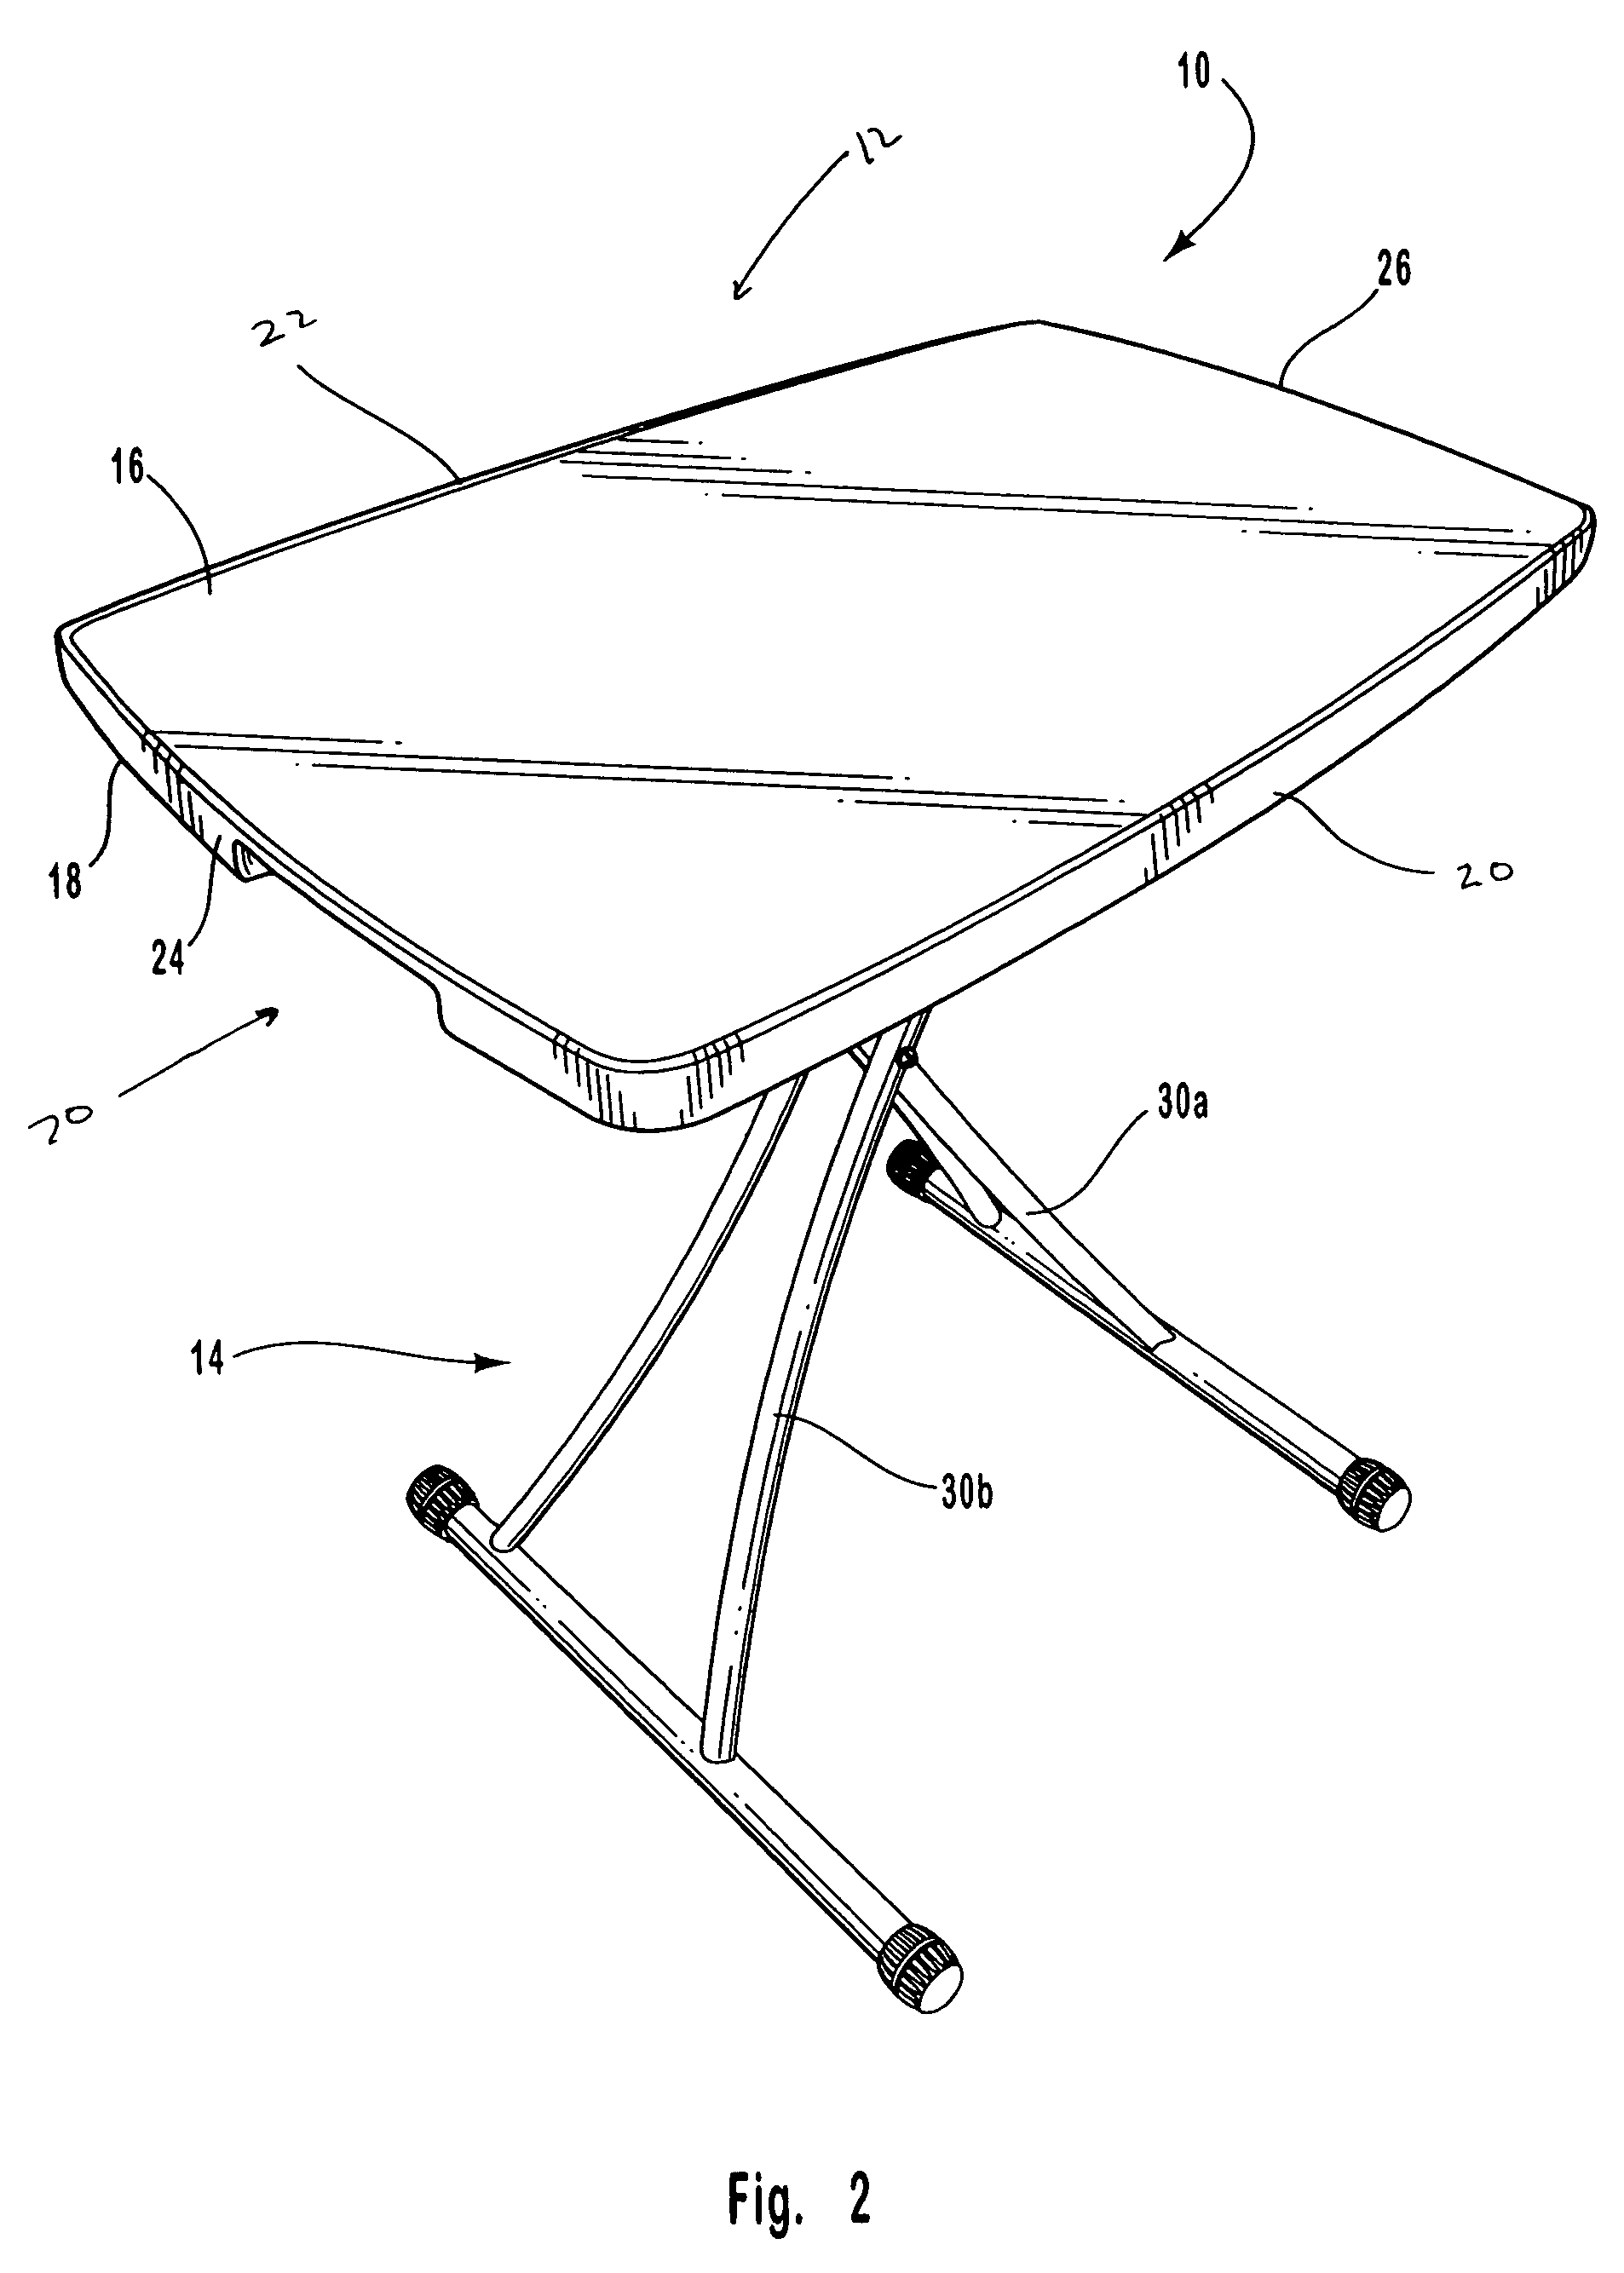 Personal table